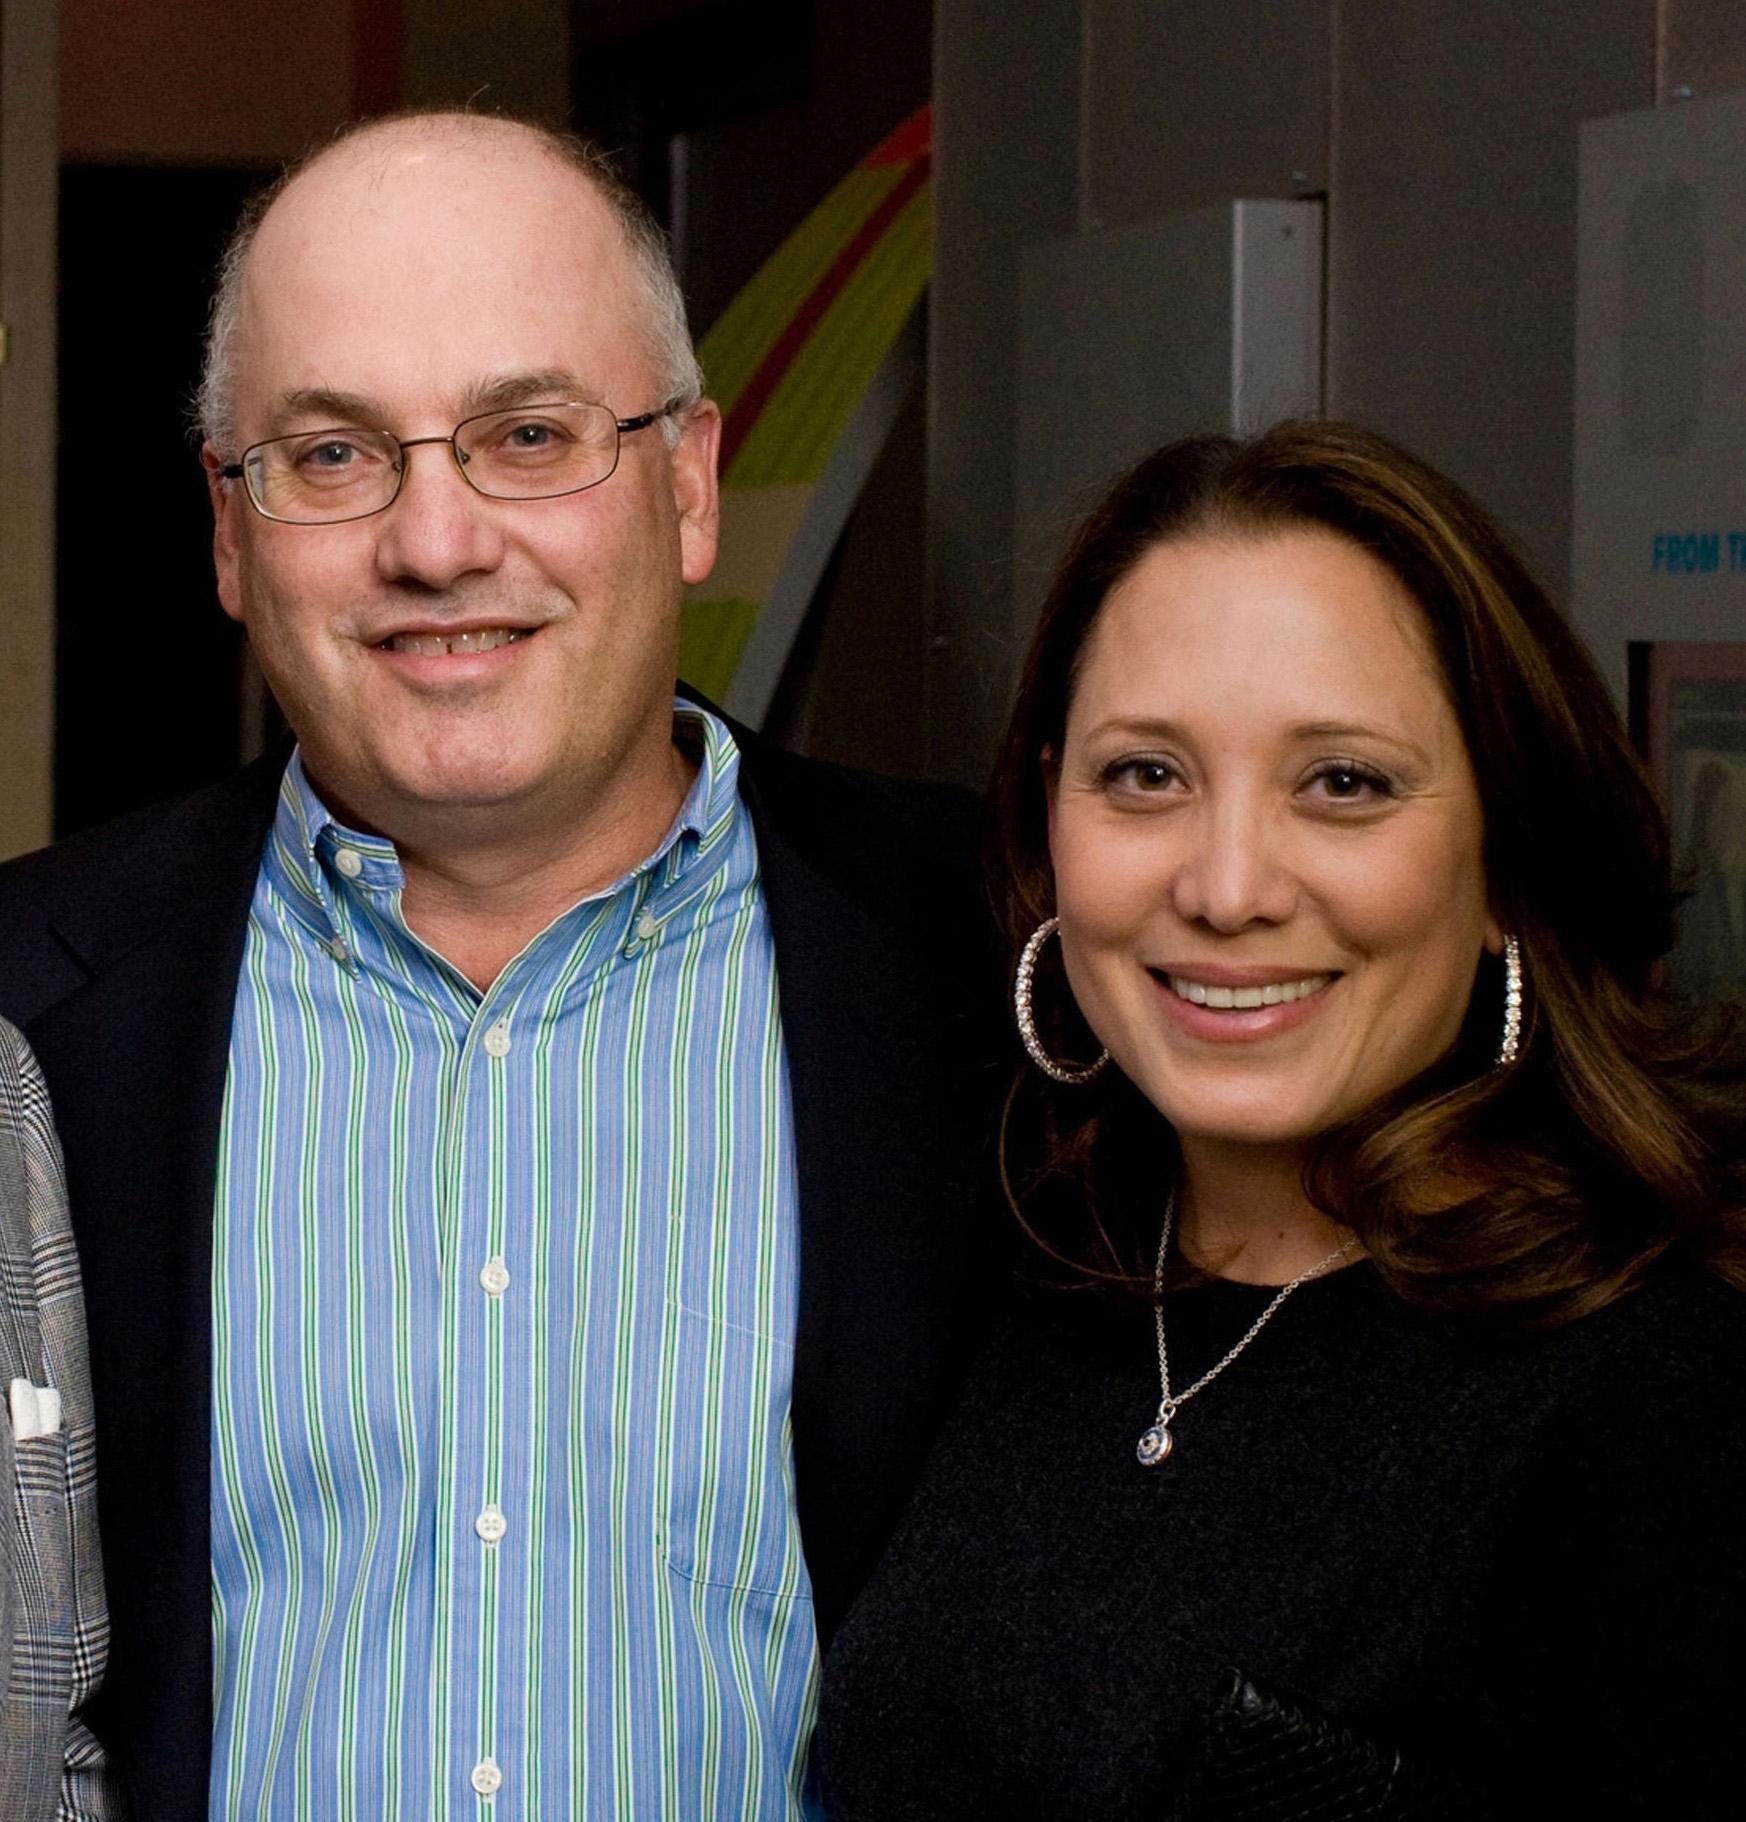 The foundation of hedge fund billionaire Steven Cohen and his wife, Alexand...